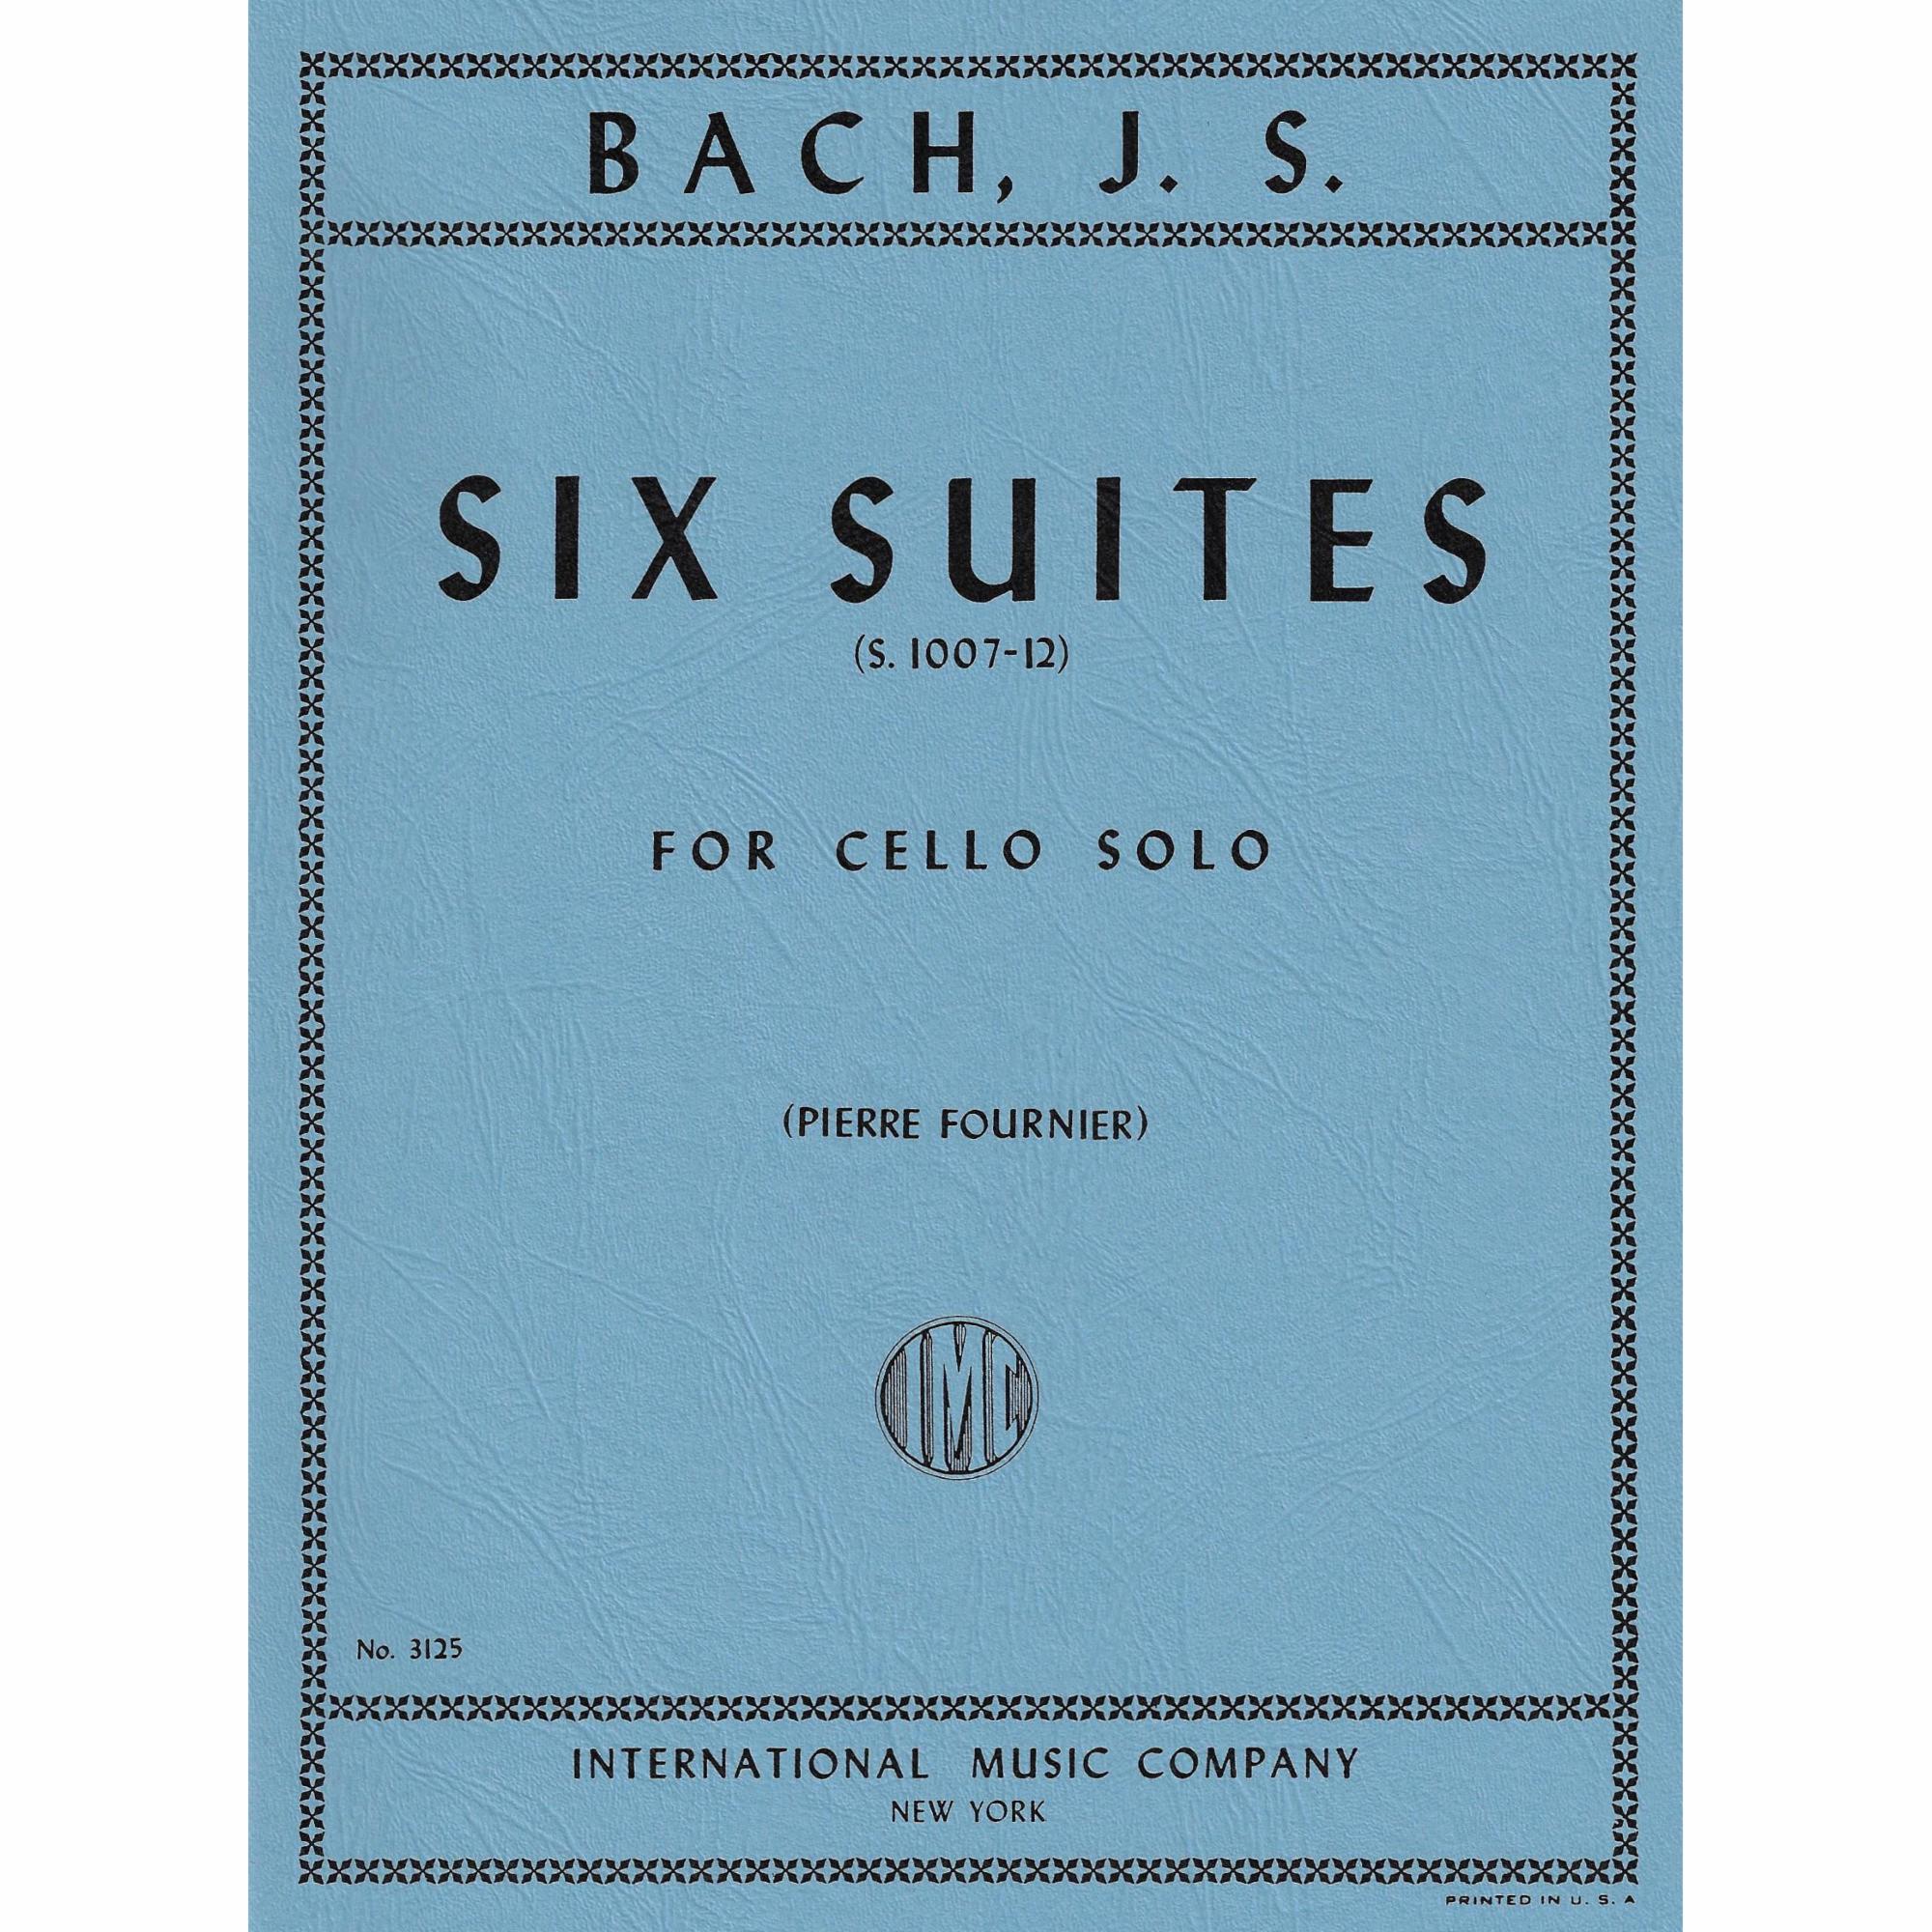 Bach -- Six Suites, S. 1007-12 for Solo Cello